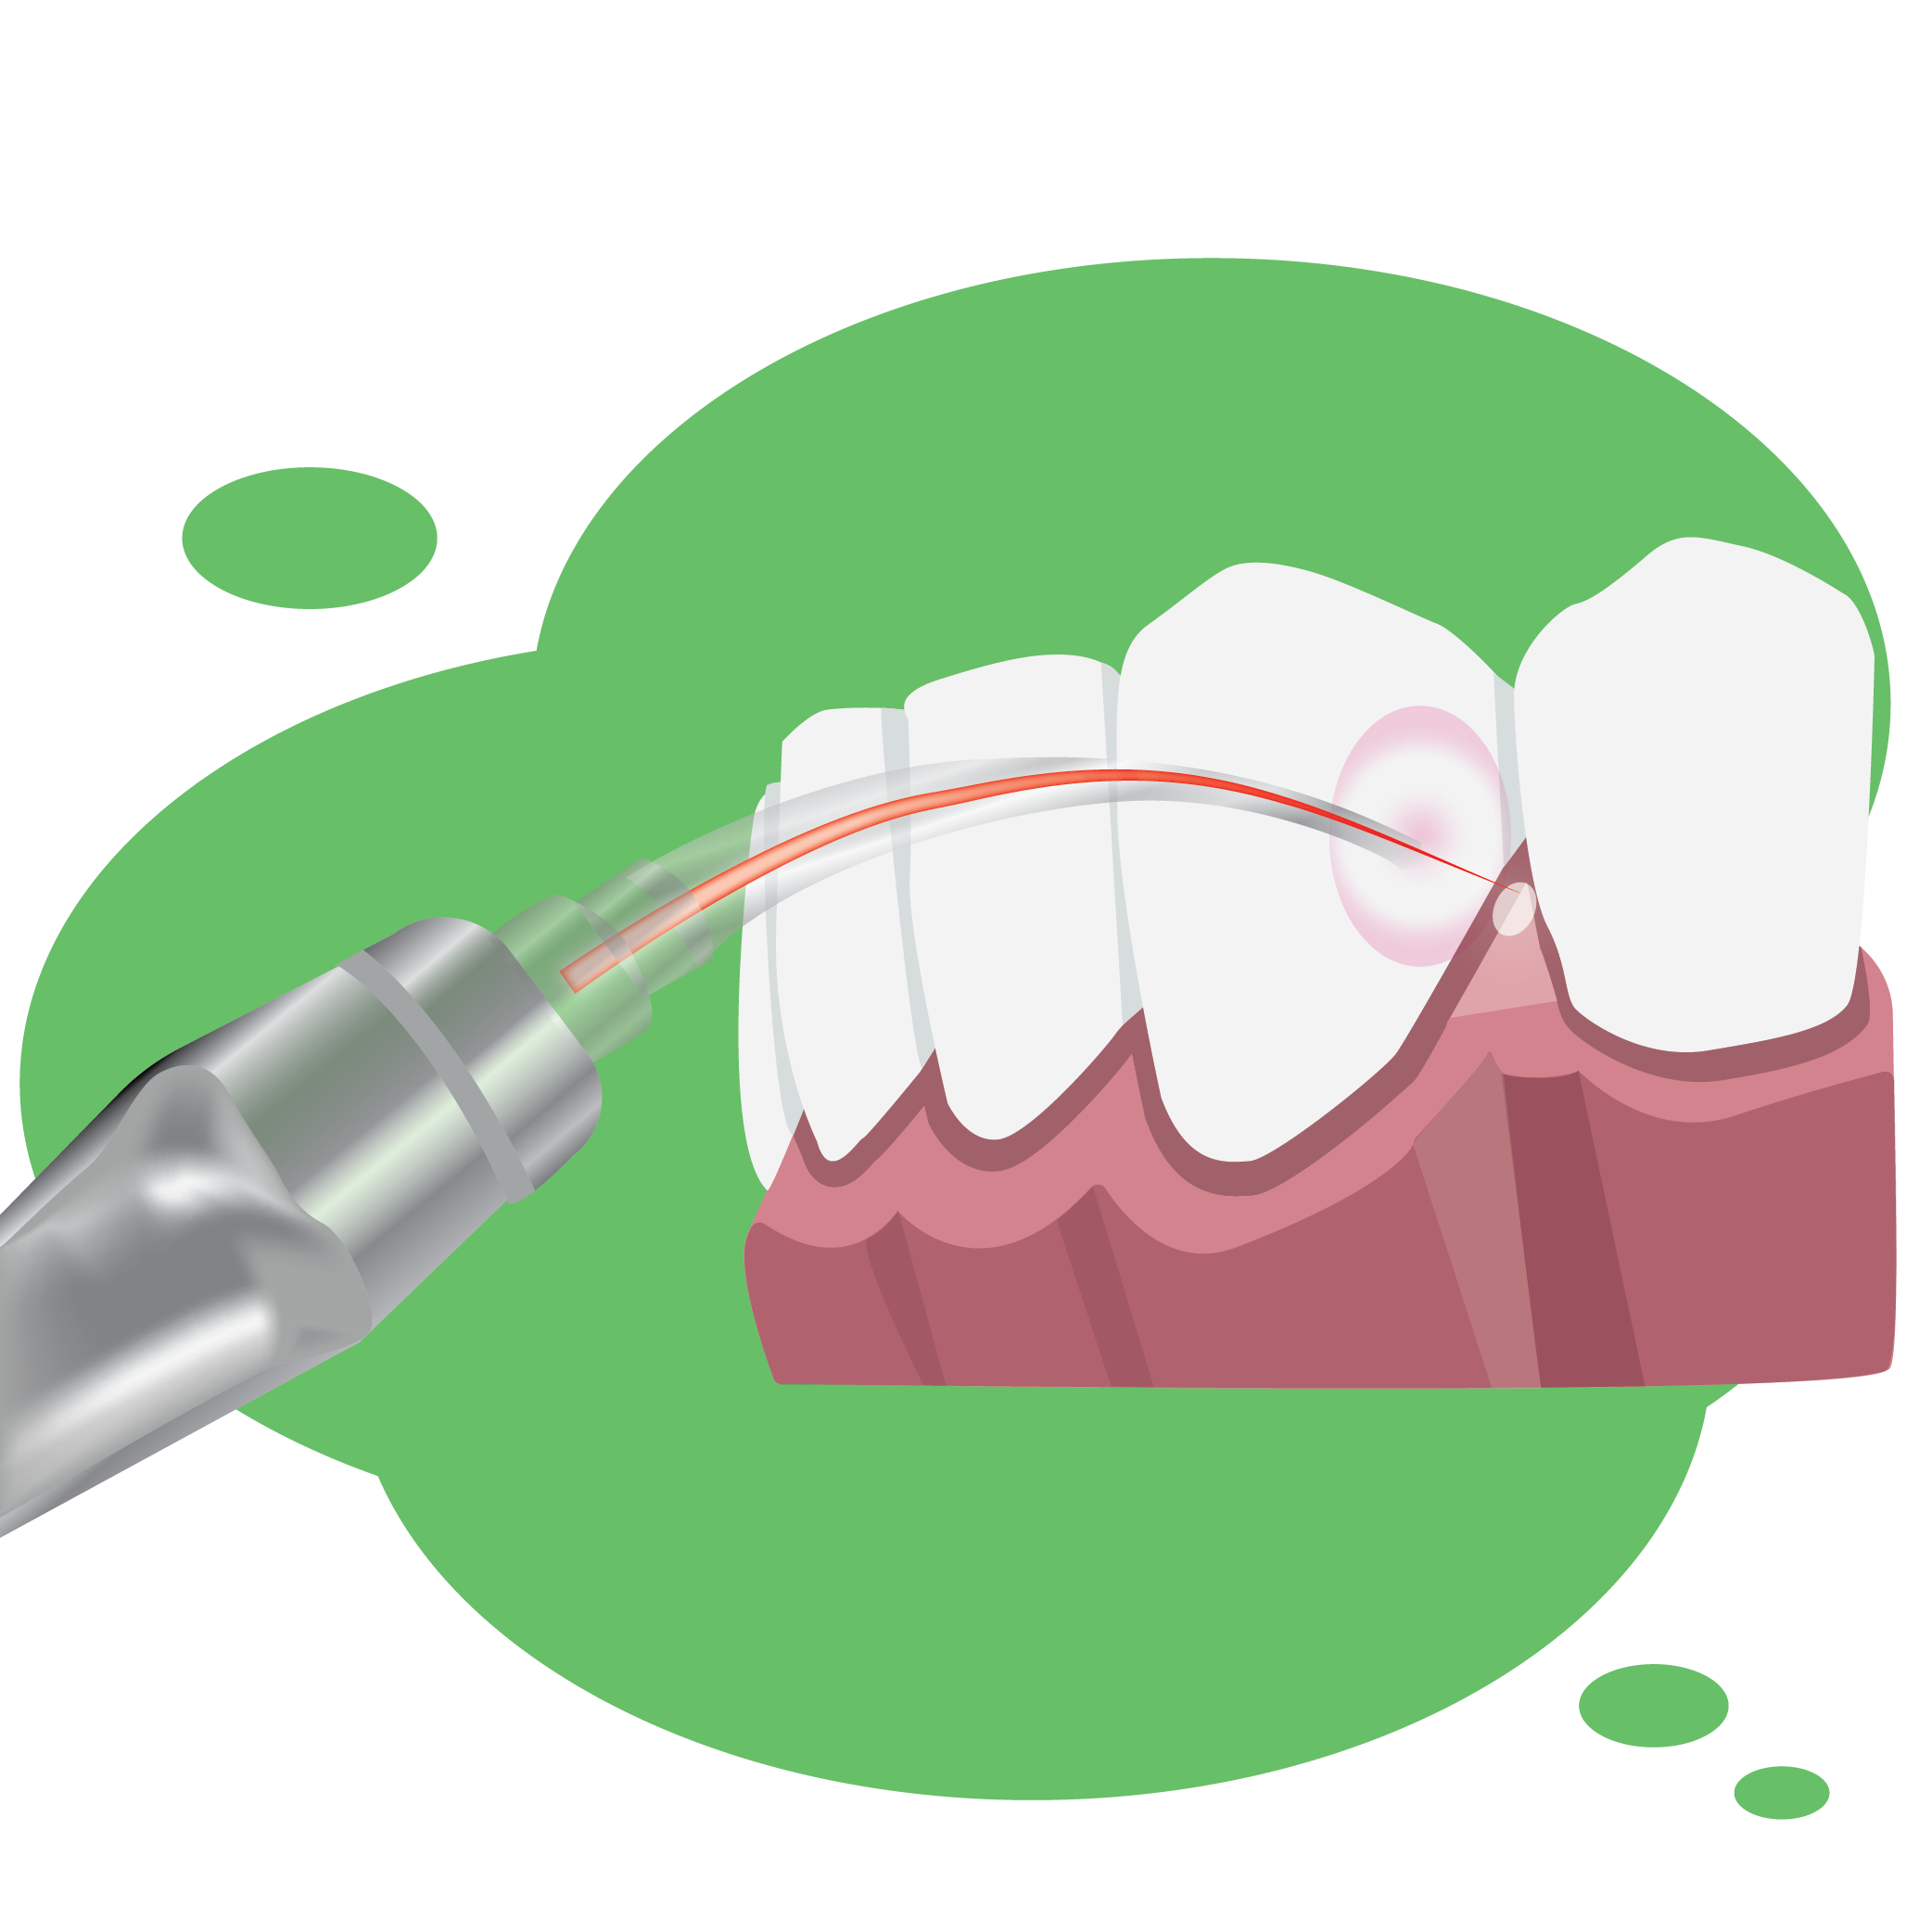 Illustration of a laser with the beam targeting the area between two teeth